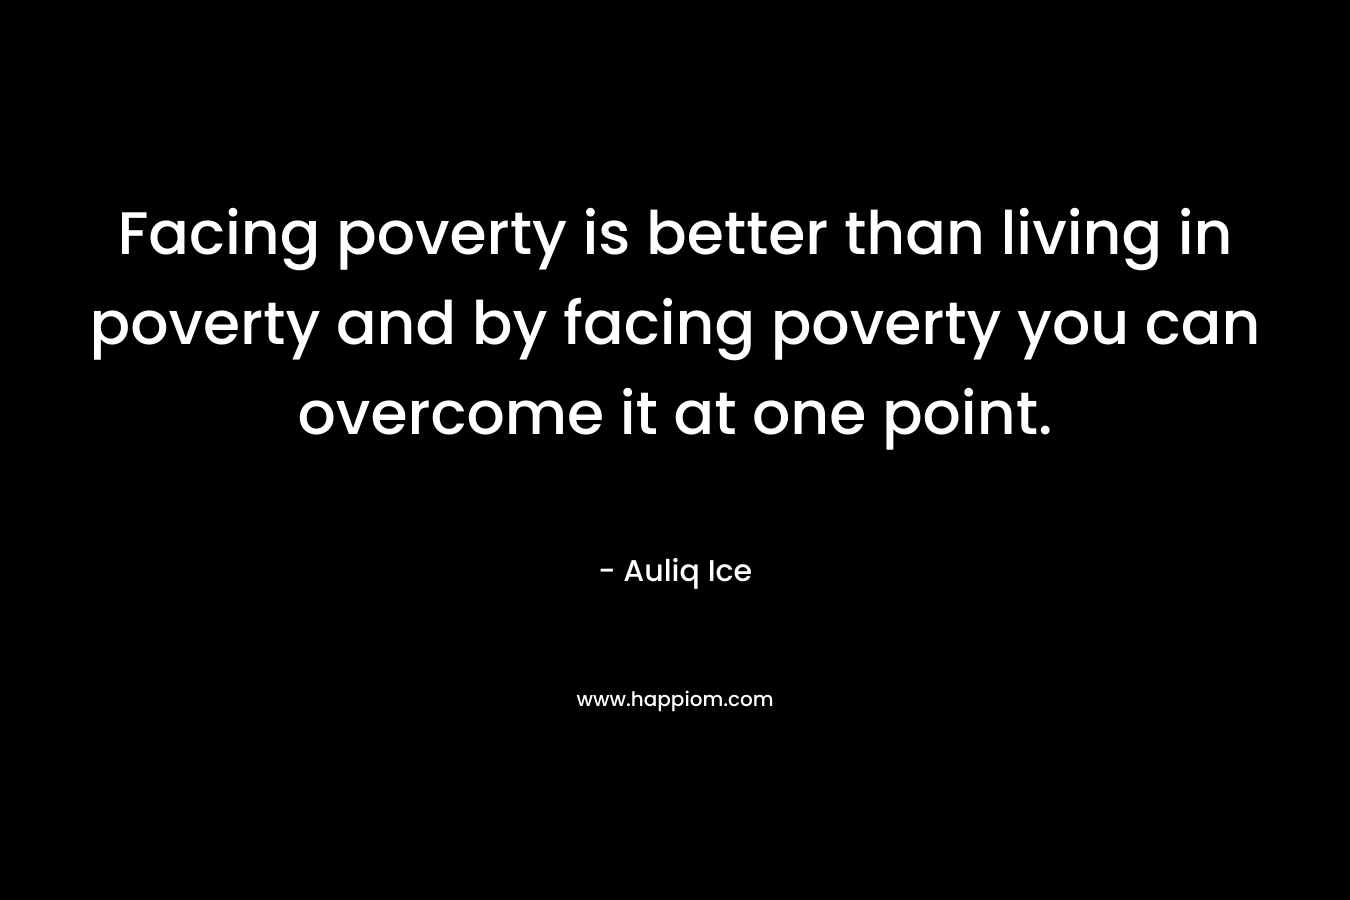 Facing poverty is better than living in poverty and by facing poverty you can overcome it at one point.